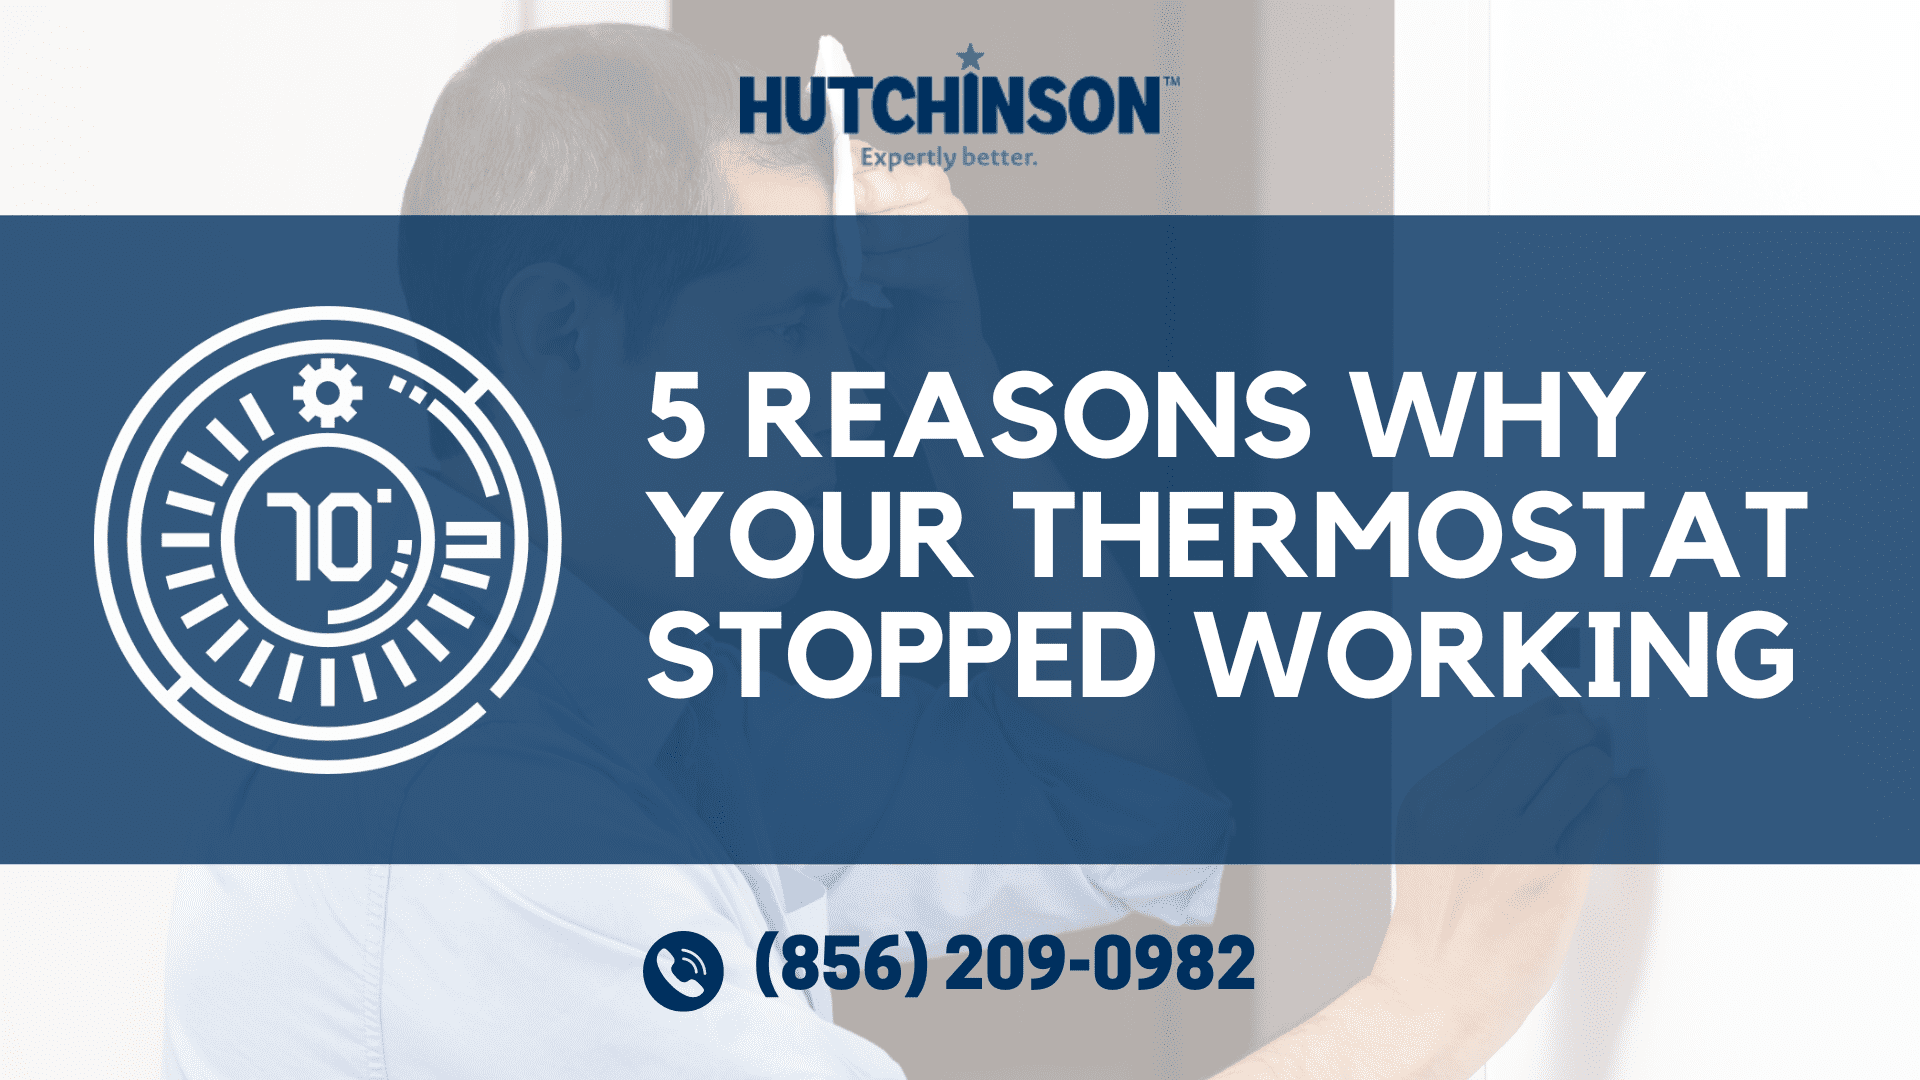 5 Reasons Why Your Thermostat Stopped Working